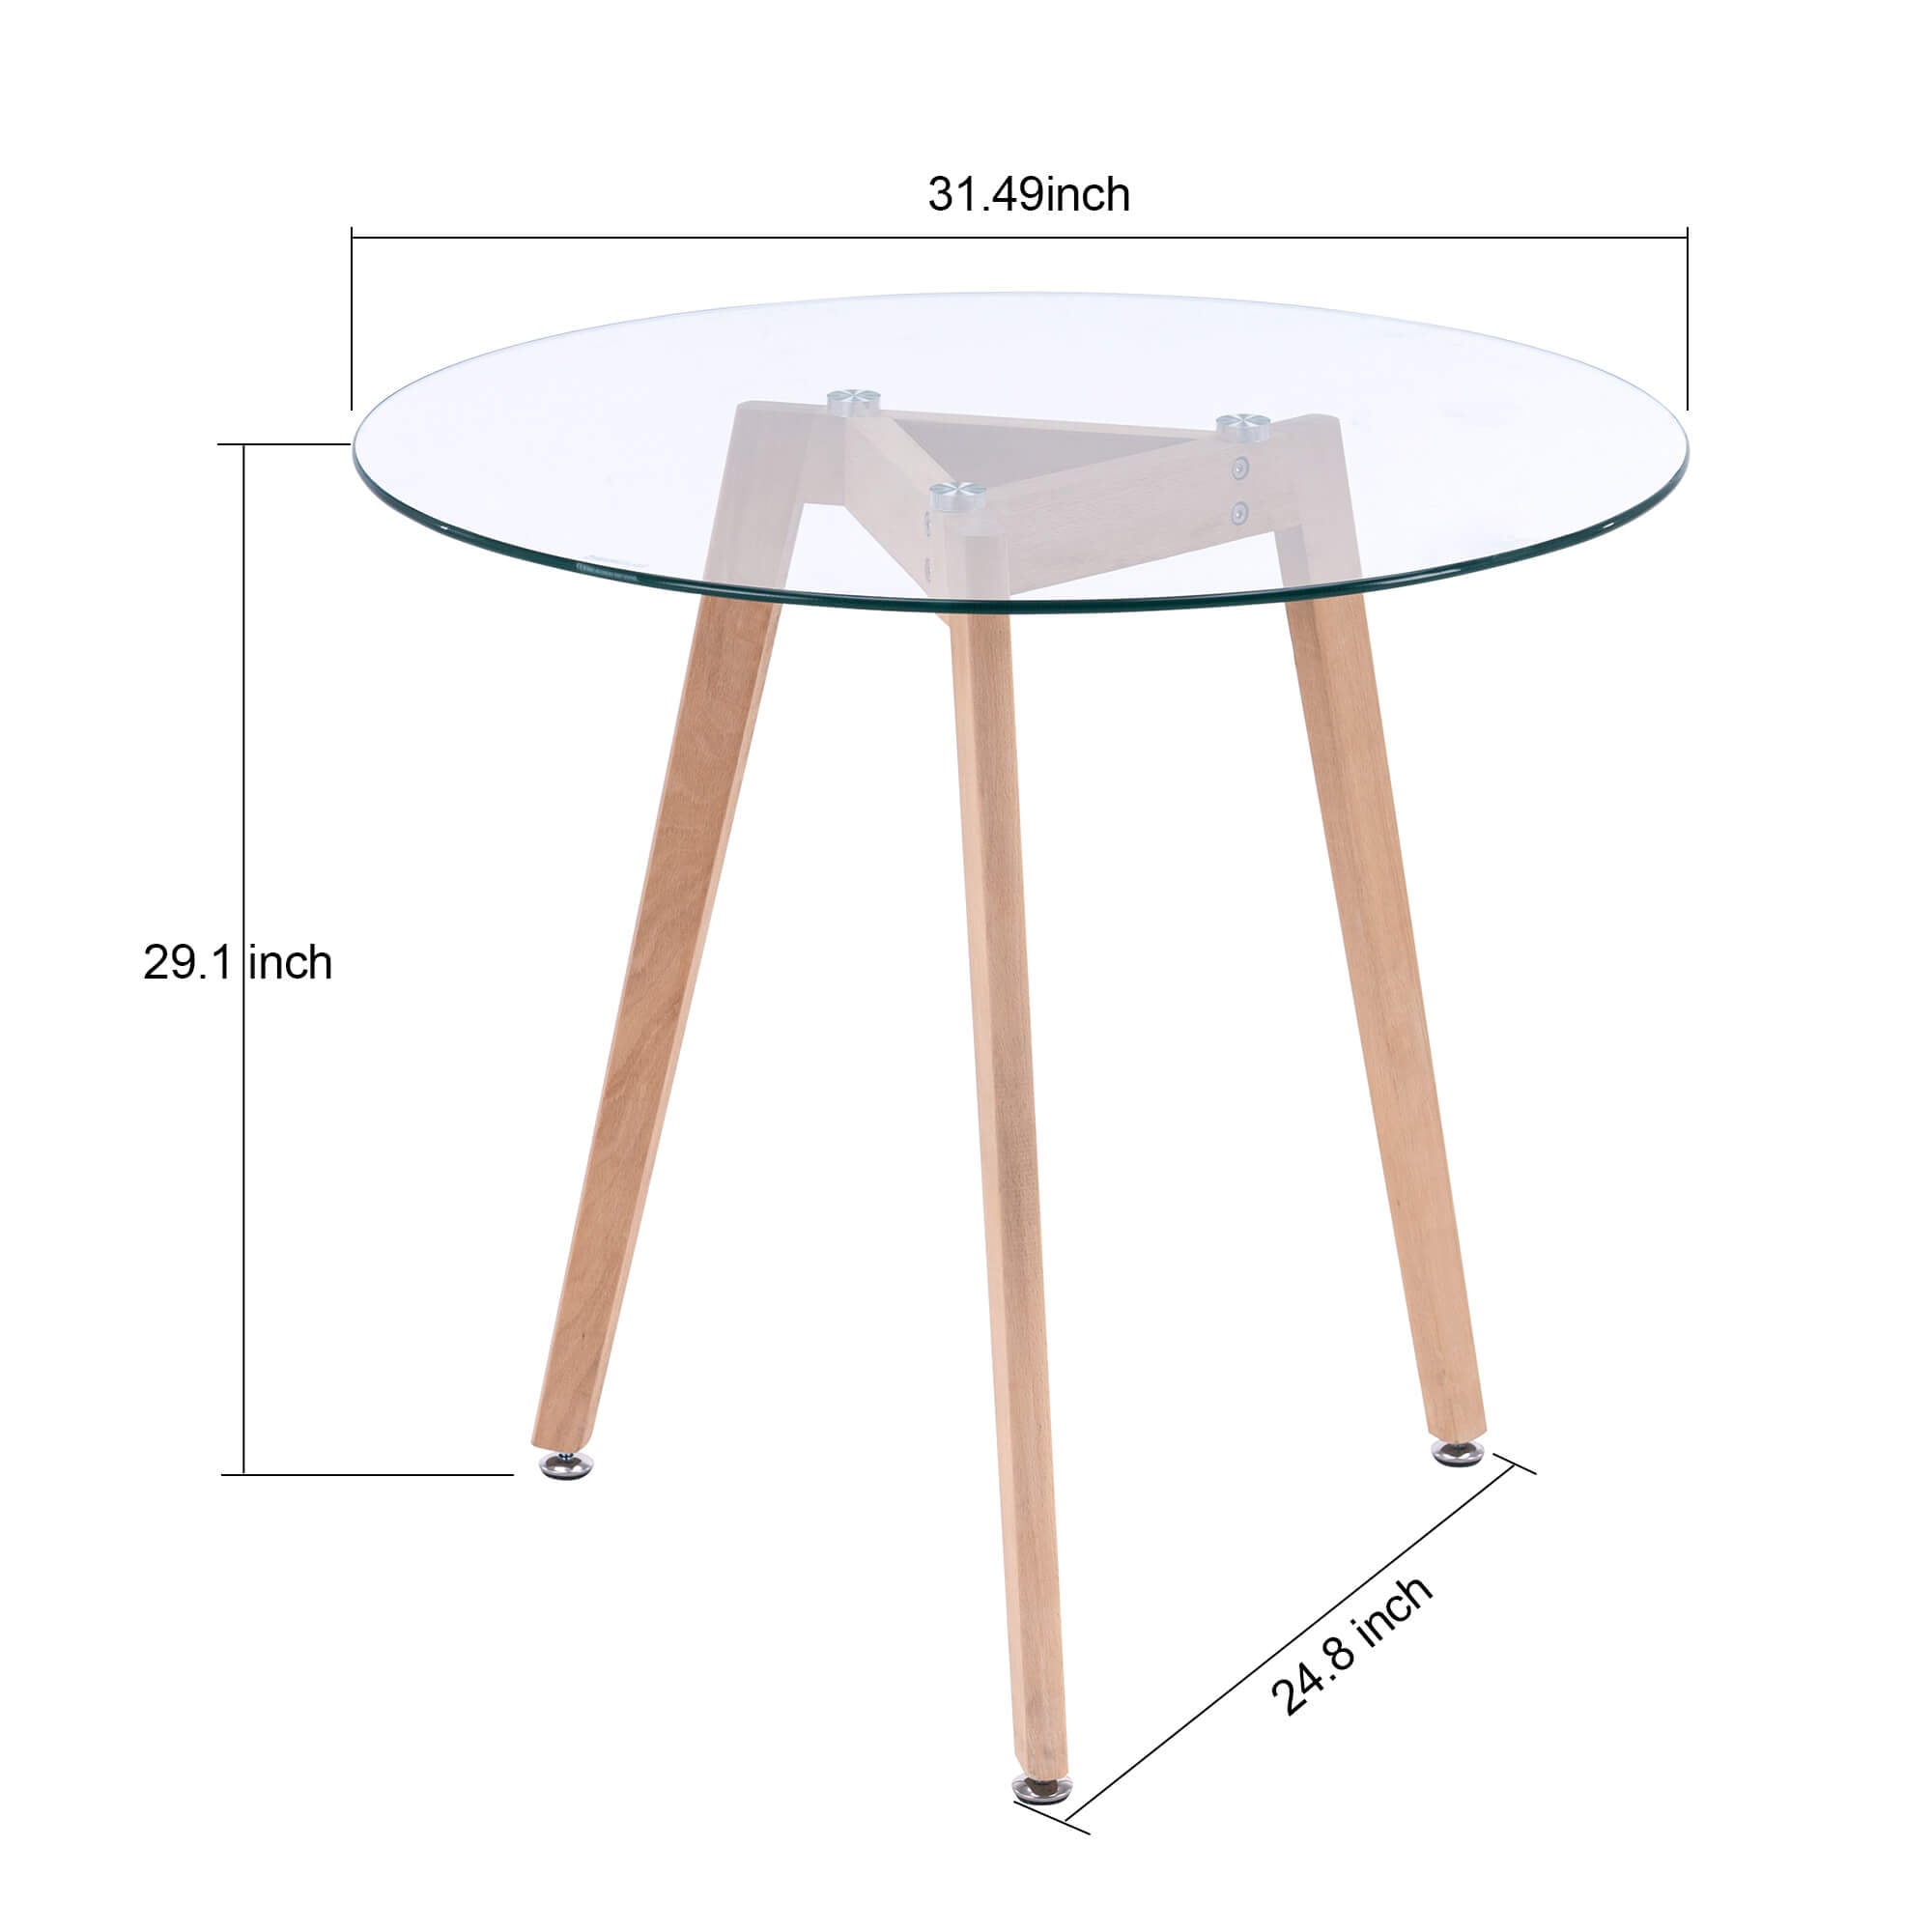 Ivinta Round Dining Table Set for 2, Modern Glass Table and 2 Grey Chairs, 3-Piece Patio Small Dining Set